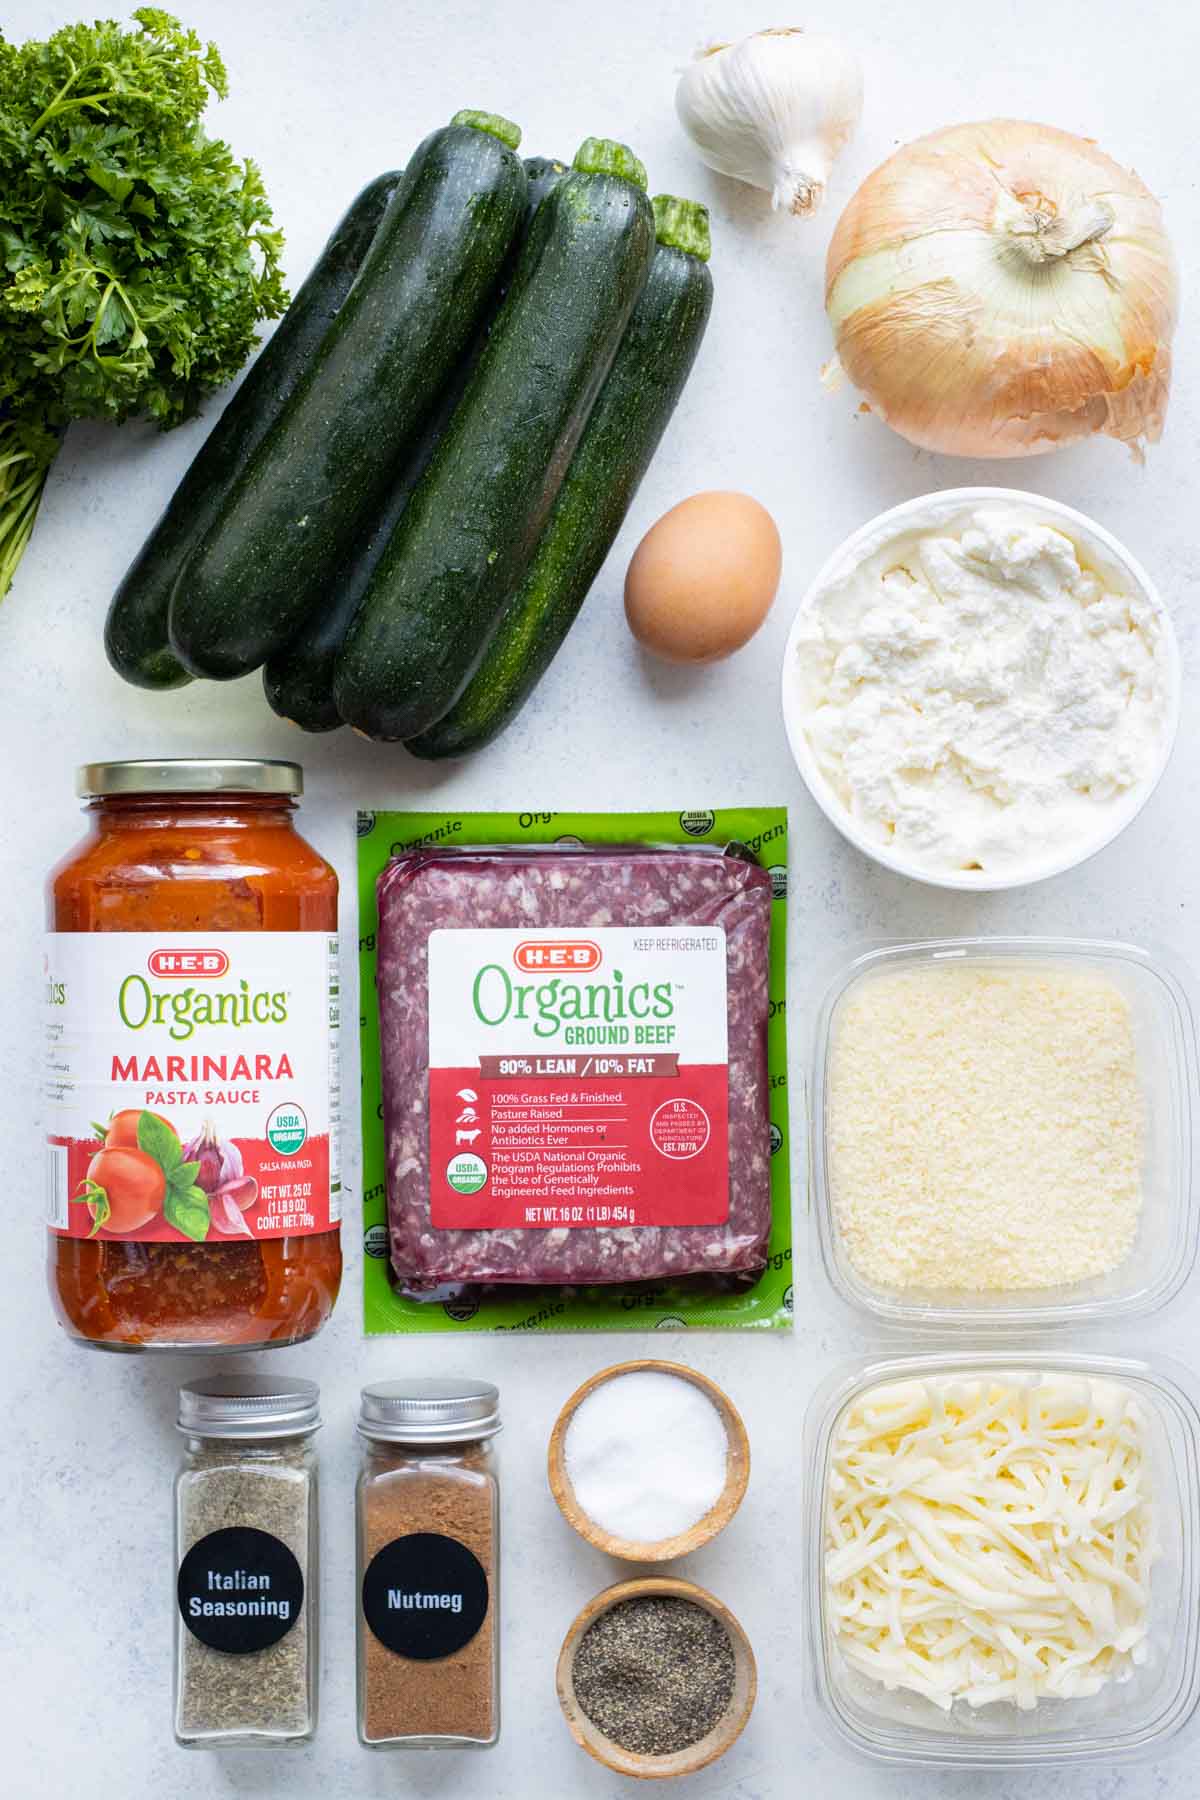 Zucchini, pasta sauce, ground meat, ricotta cheese, and seasoning are the ingredients for zucchini lasagna.